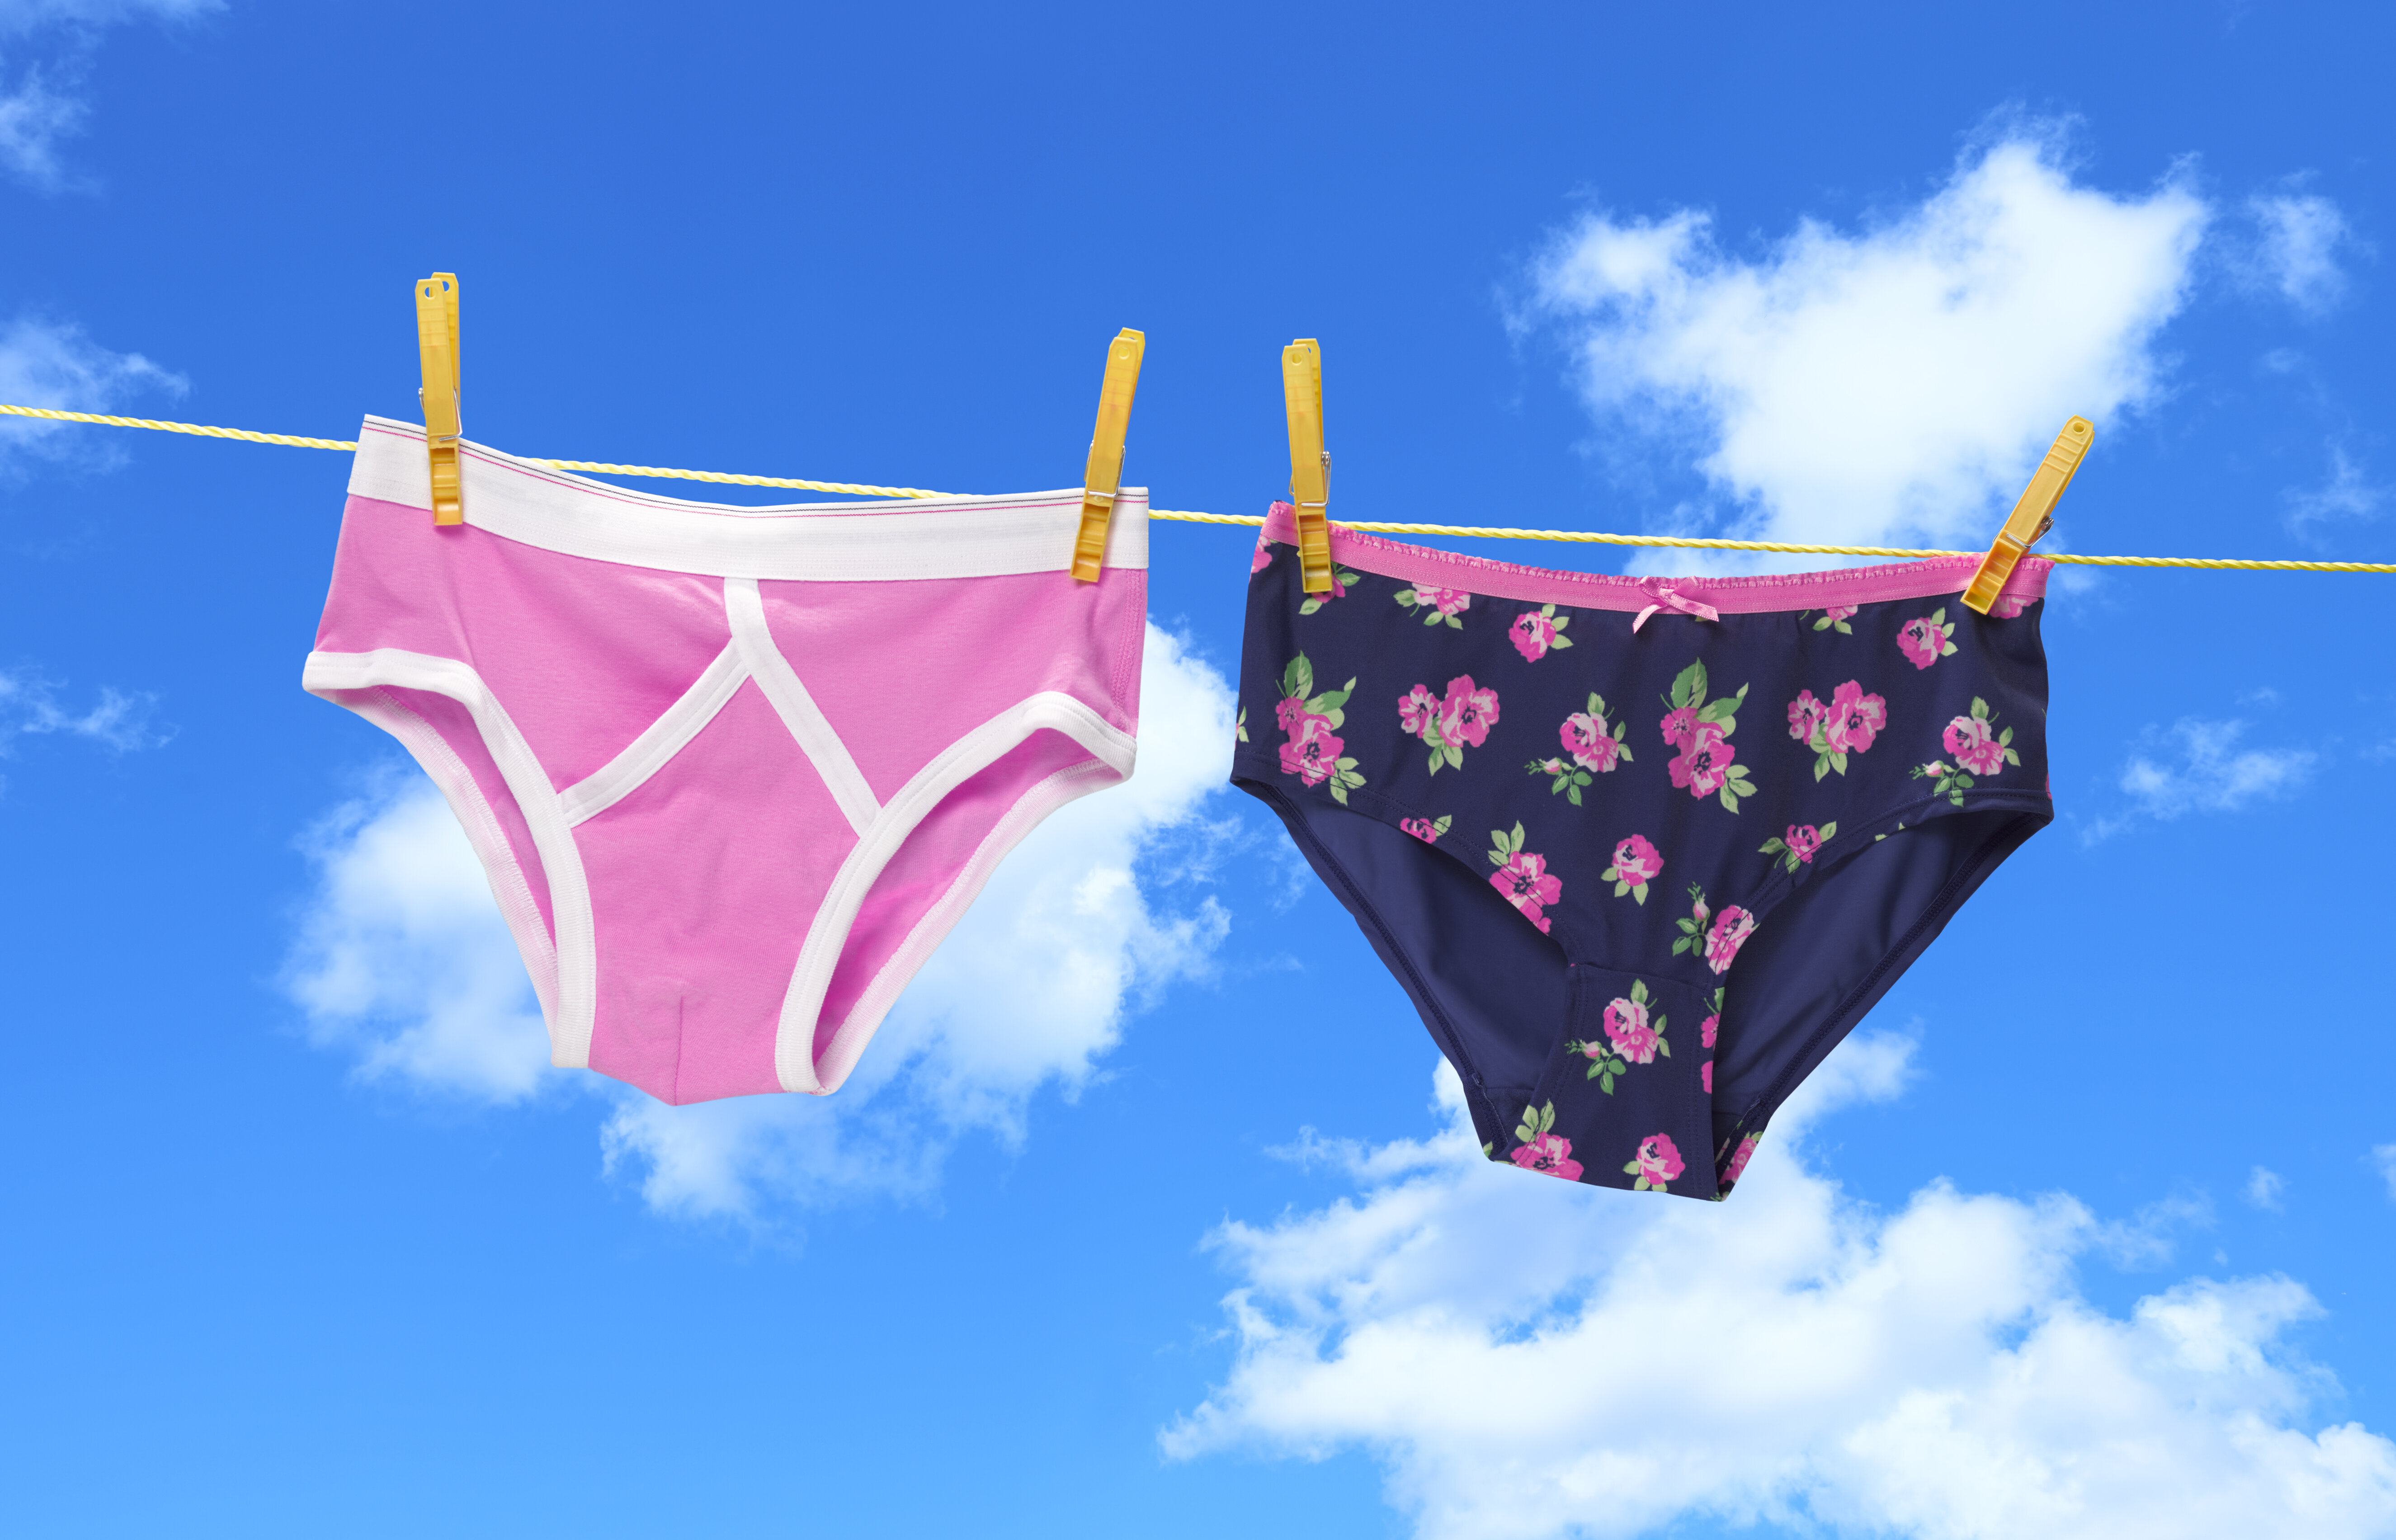 Two pairs of underwear hanging on a clothesline against a blue sky